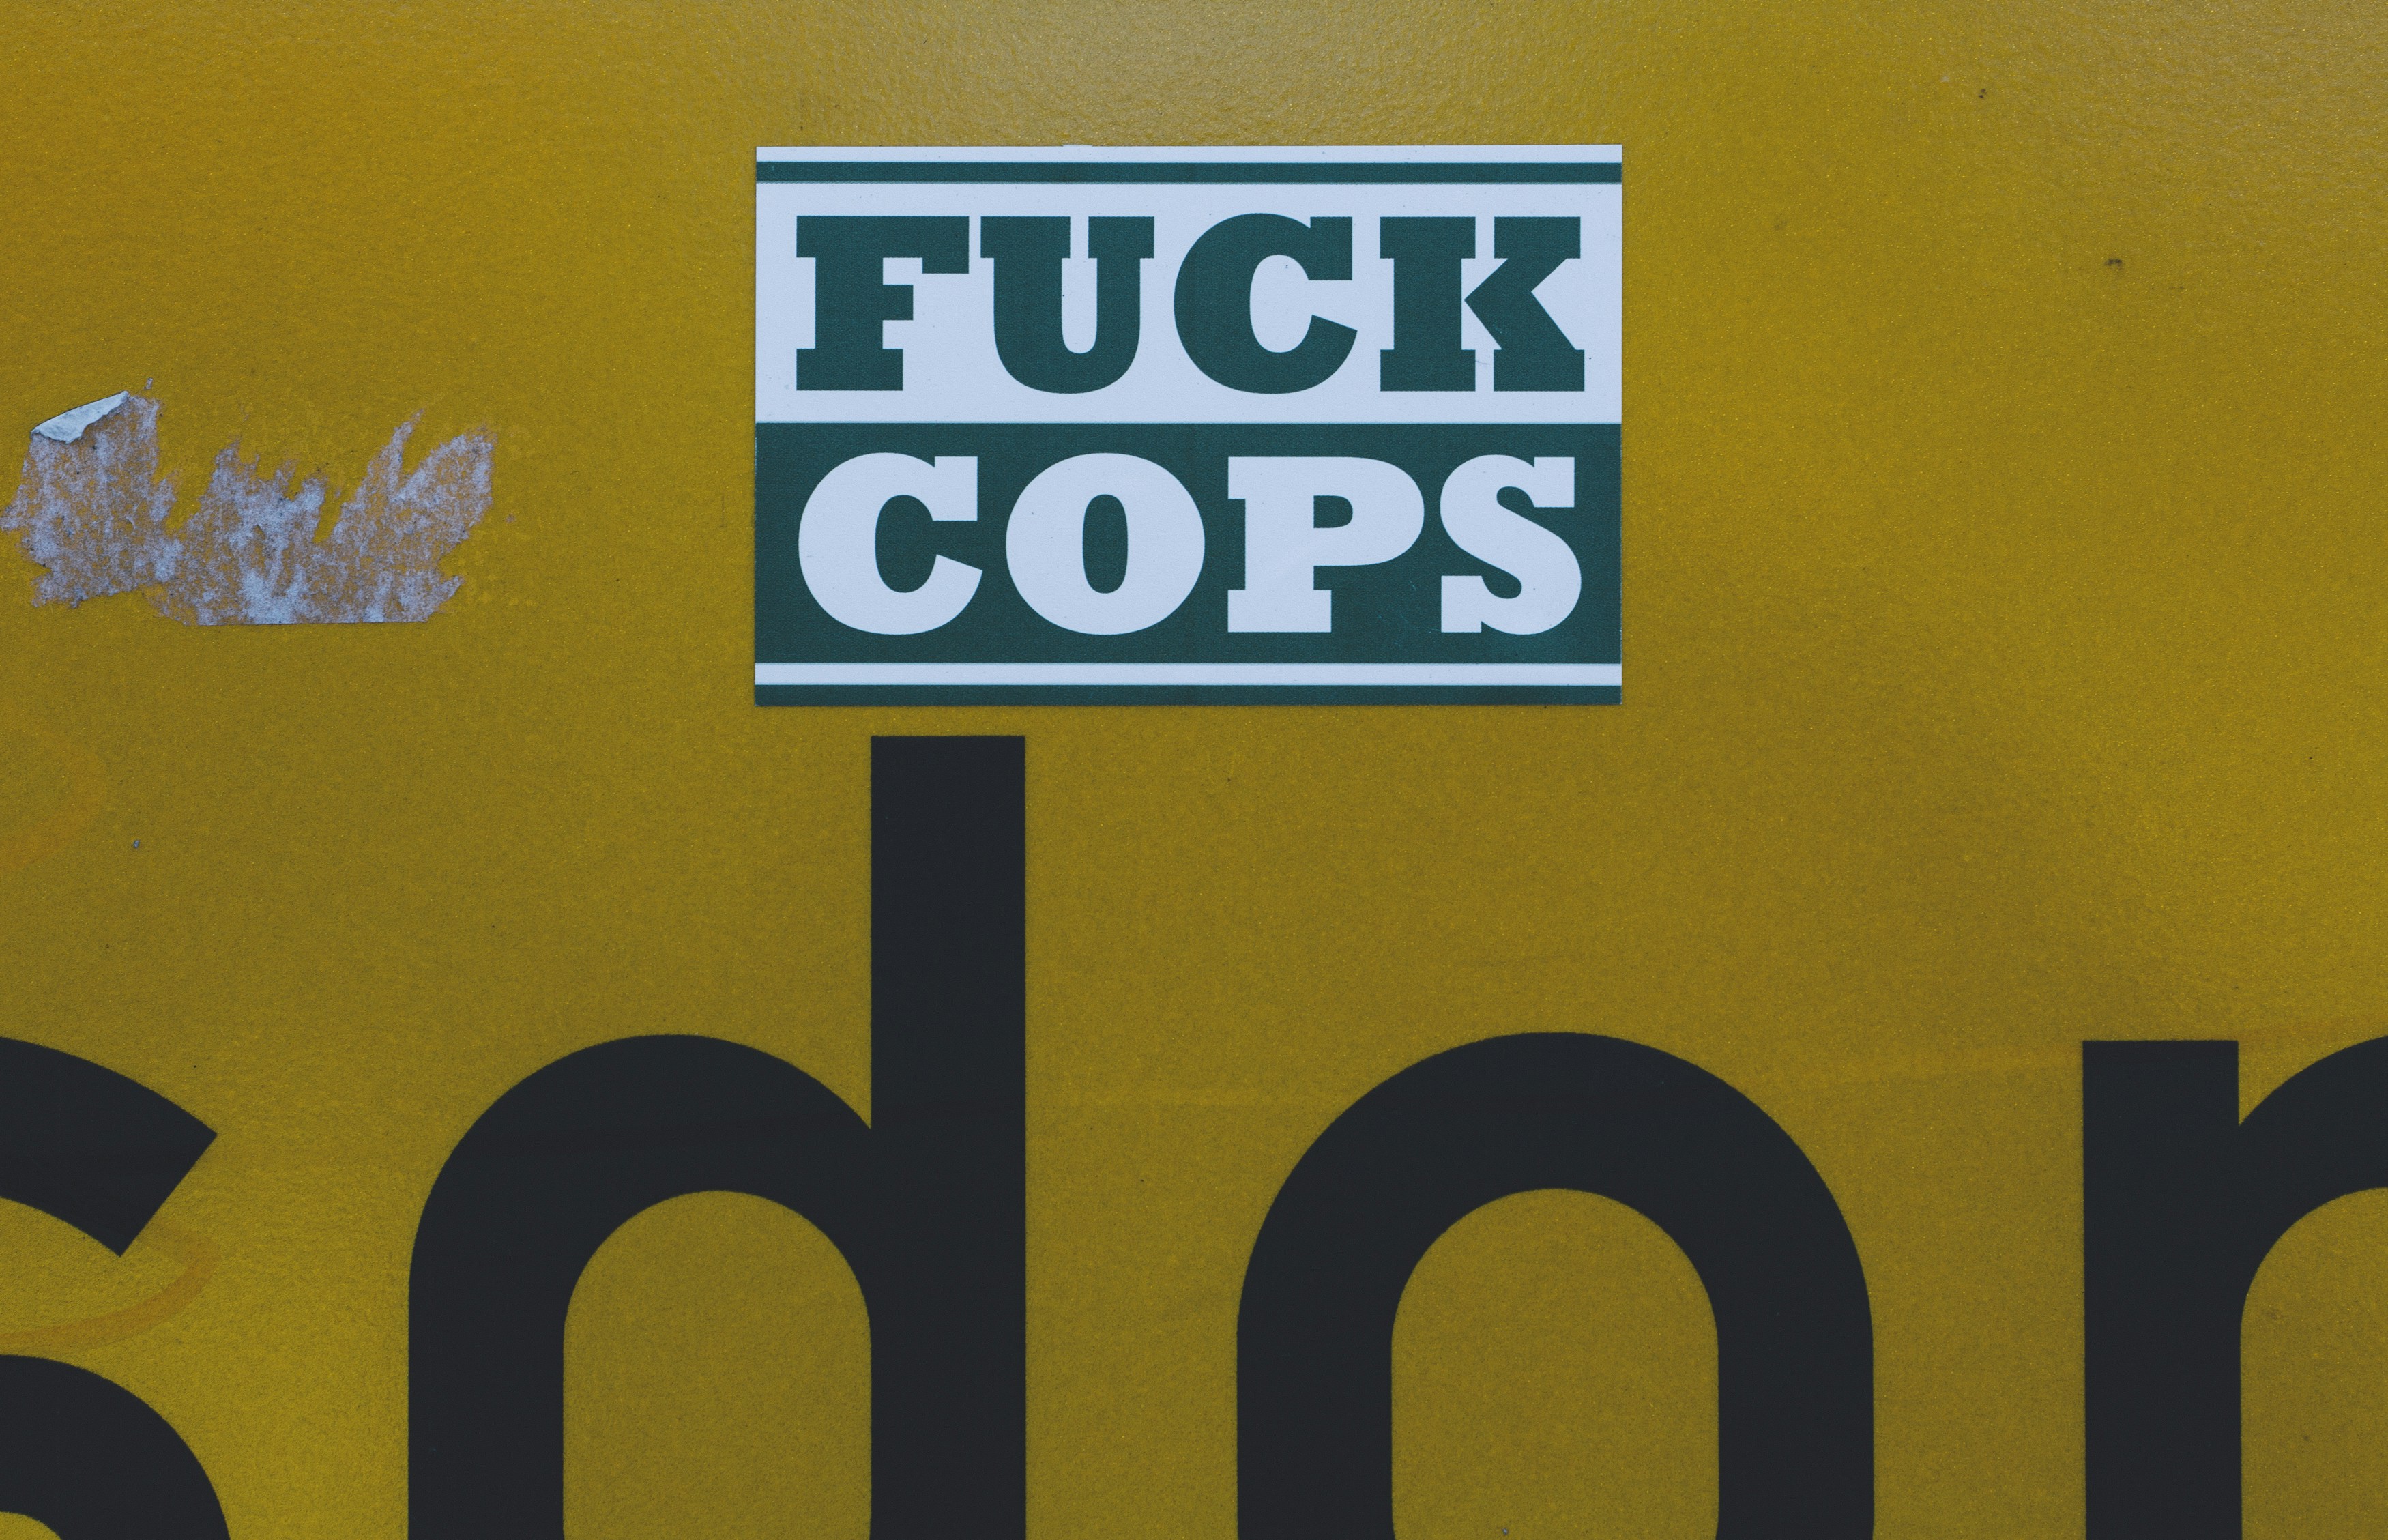 Vandalism – FUCK COPS – sticker. Made with Canon 5d Mark III and analog vintage lens, Leica APO Macro Elmarit-R 2.8 100mm (Year: 1993)